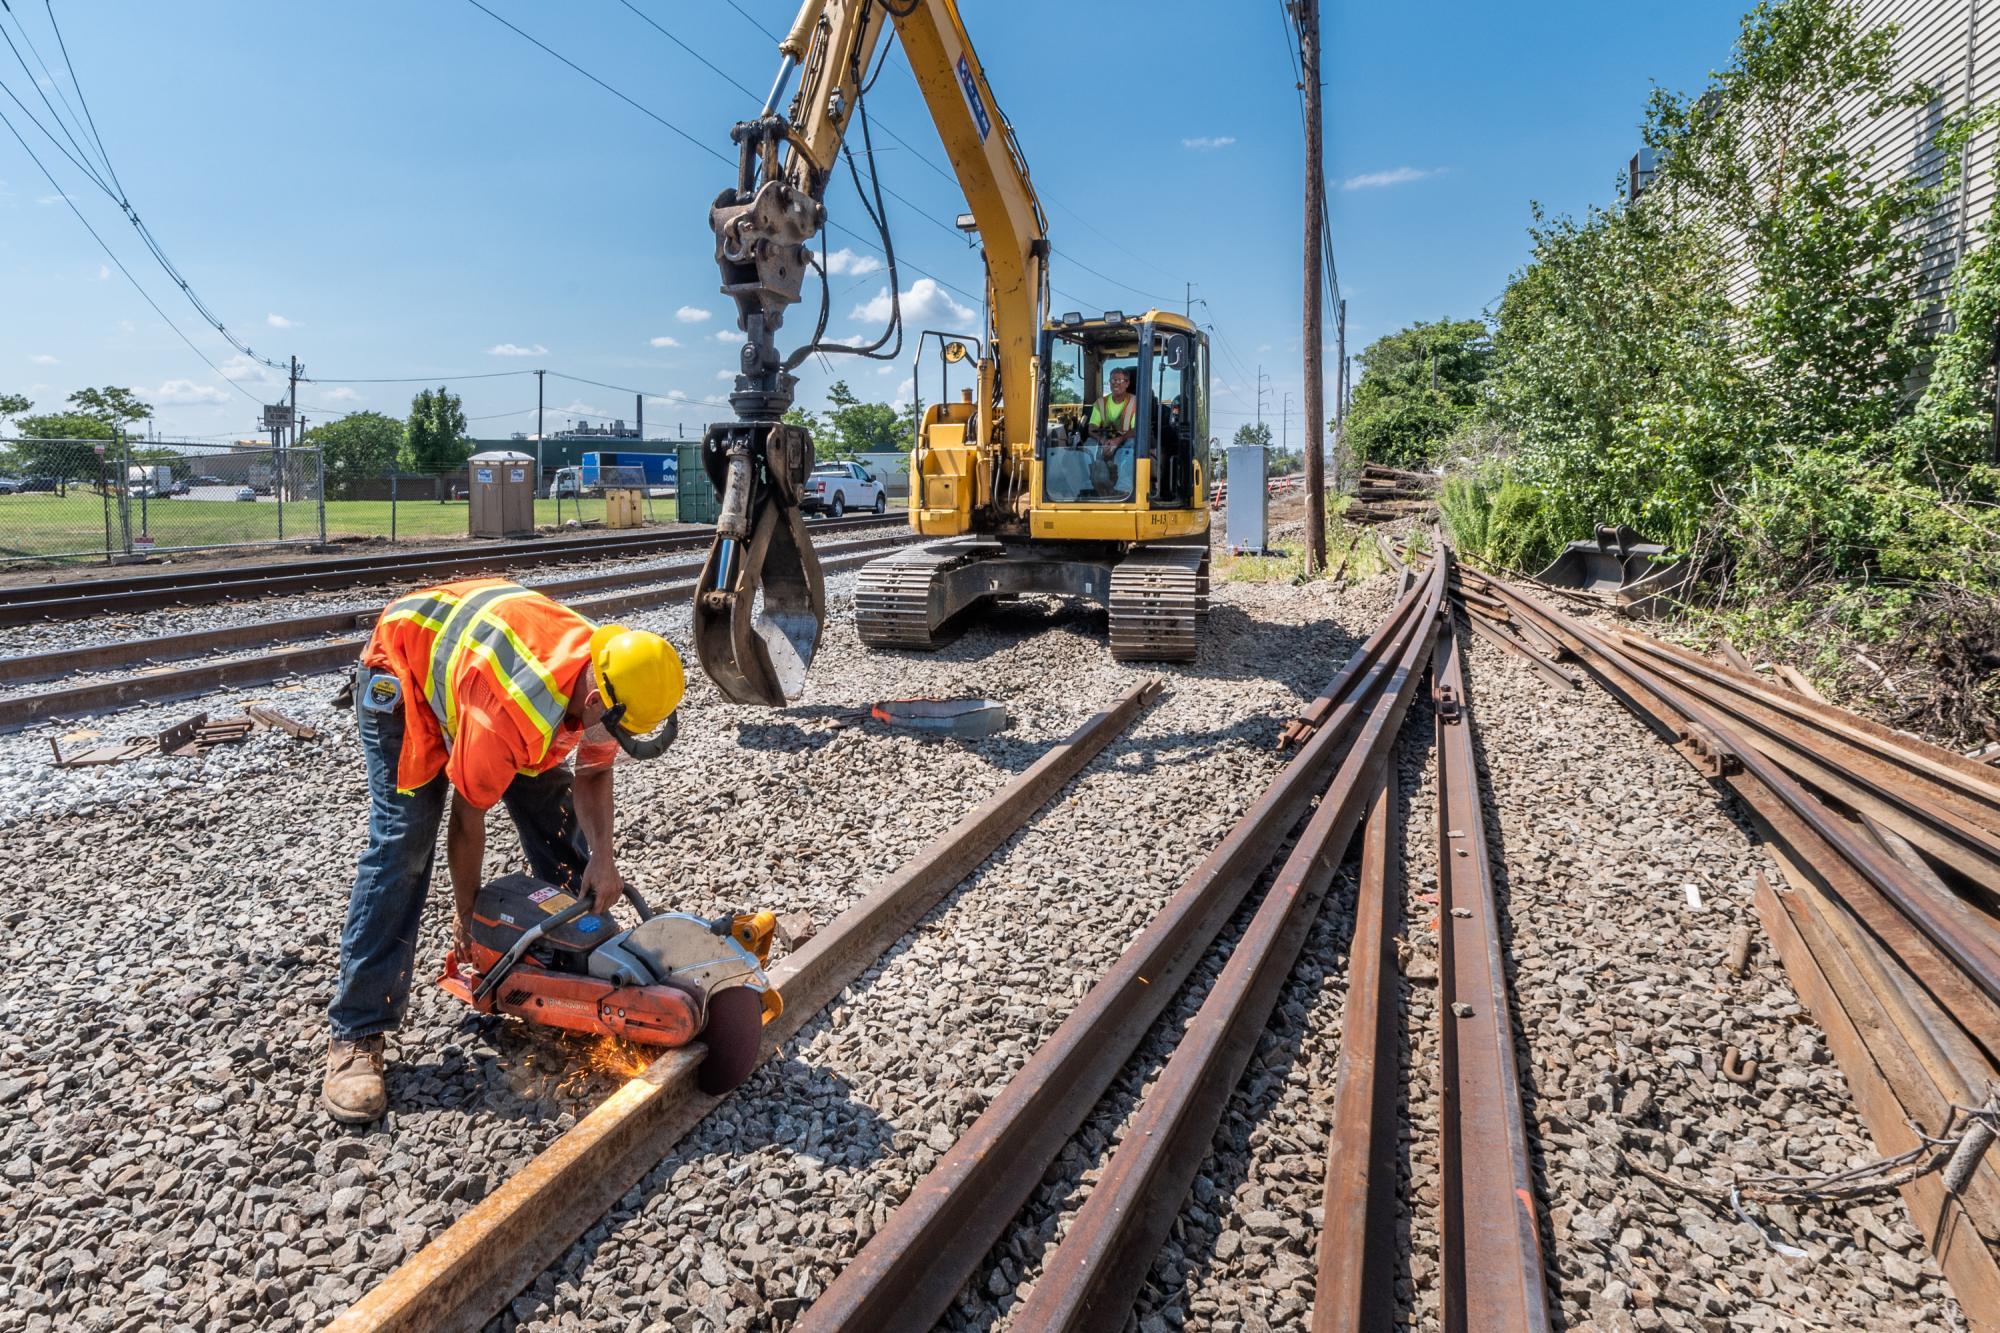 A crewperson uses a handheld rail cutting machine to cut steel rail, with an excavator in the background, and lengths of rail on the right.